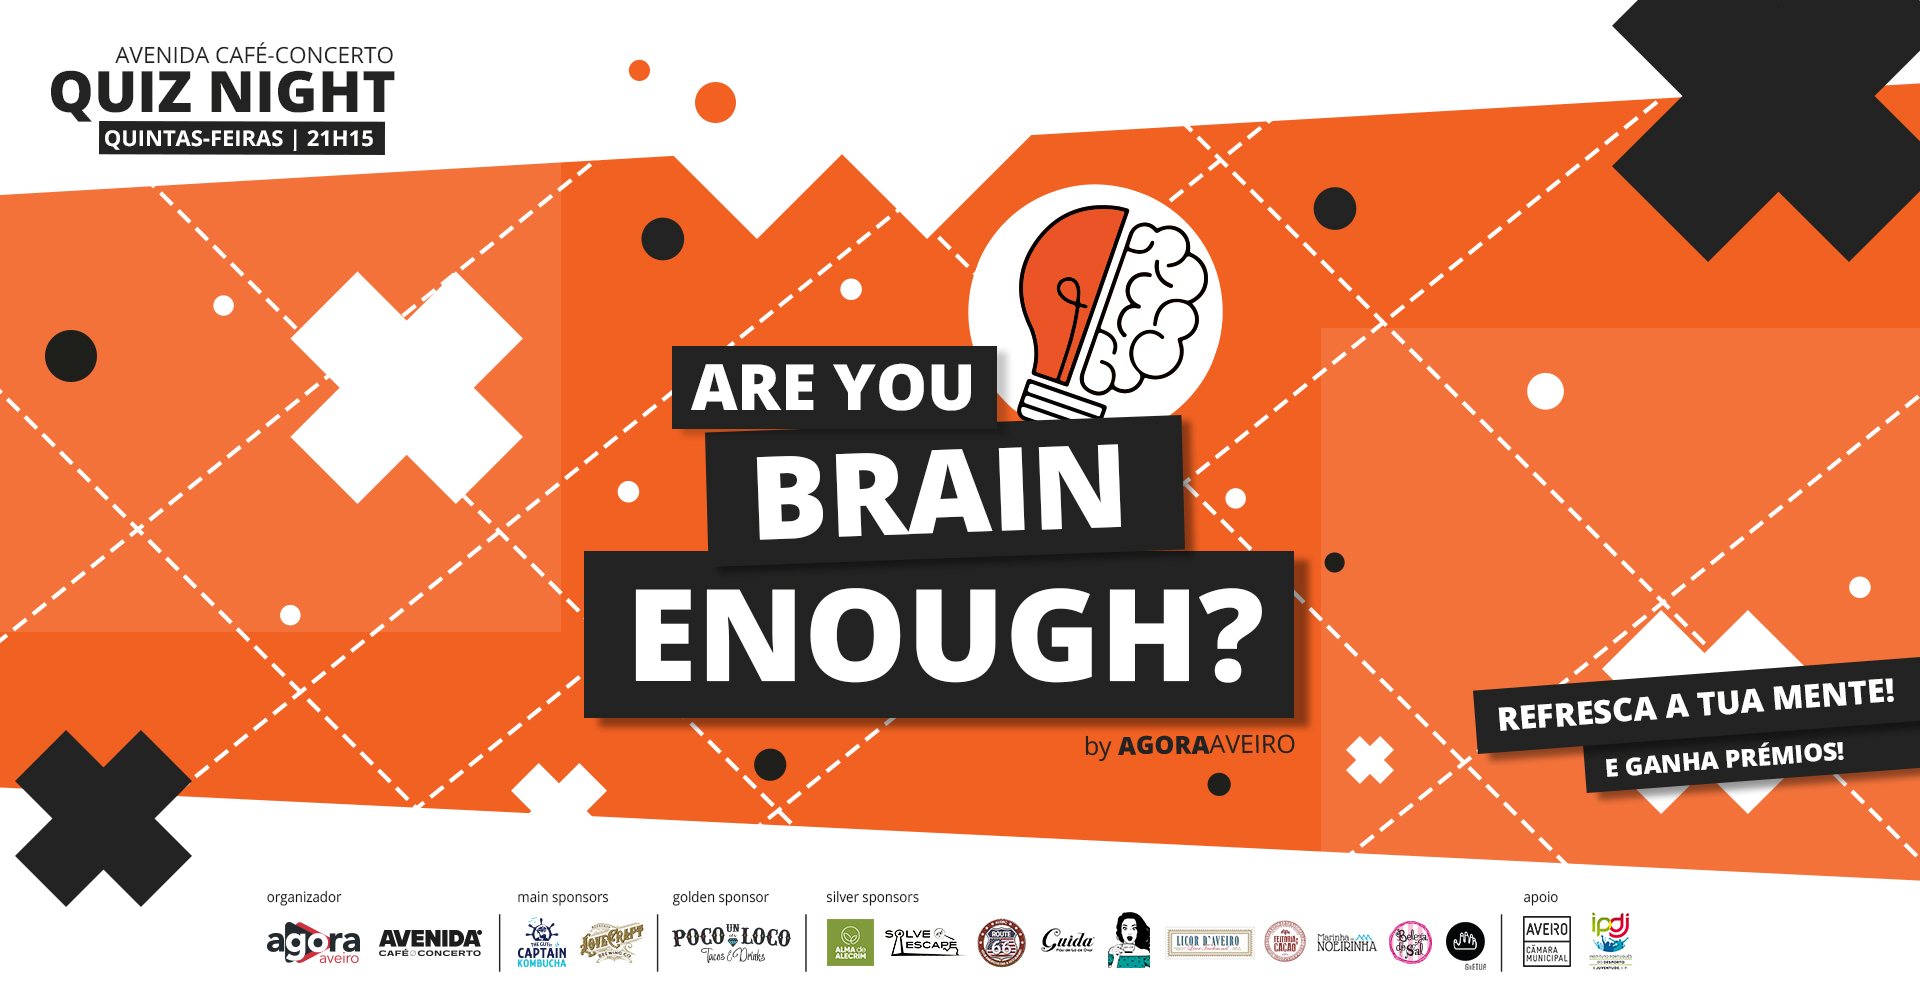 Are You Brain Enough?